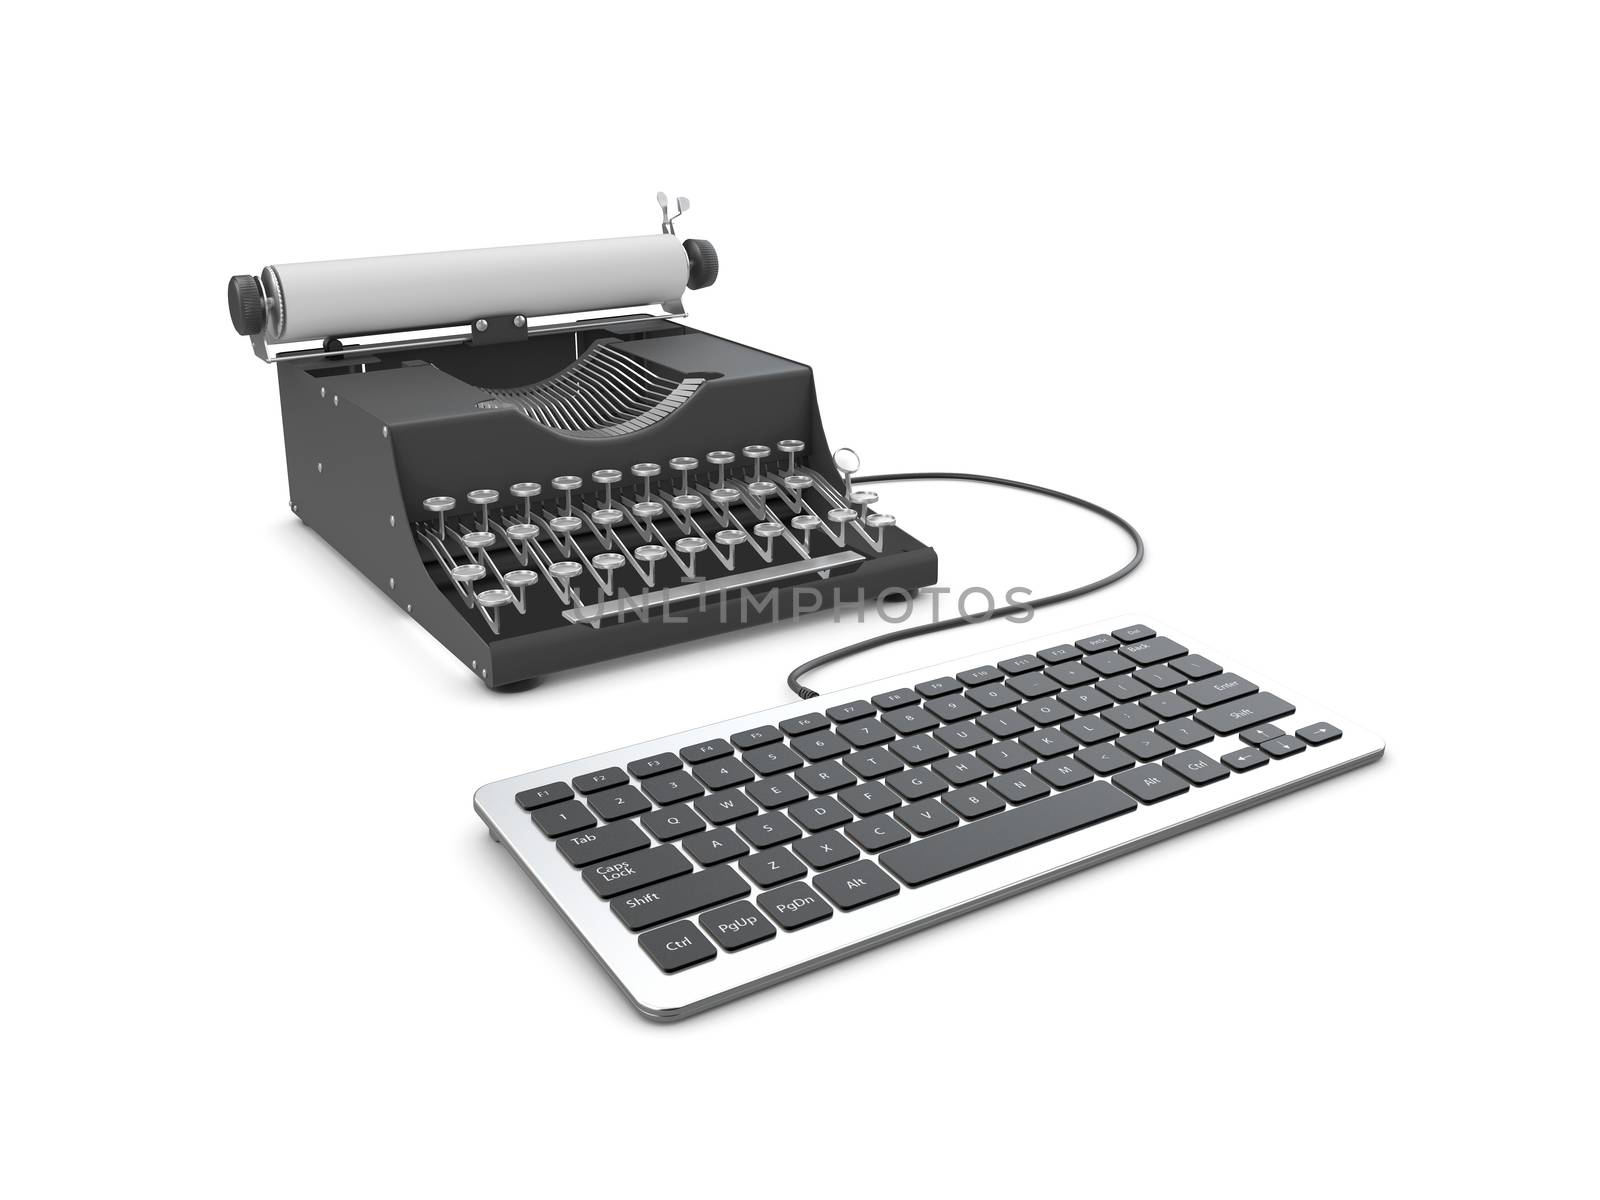 3d illustration of Old typewriter and laptop on table. Concept of technology progress.